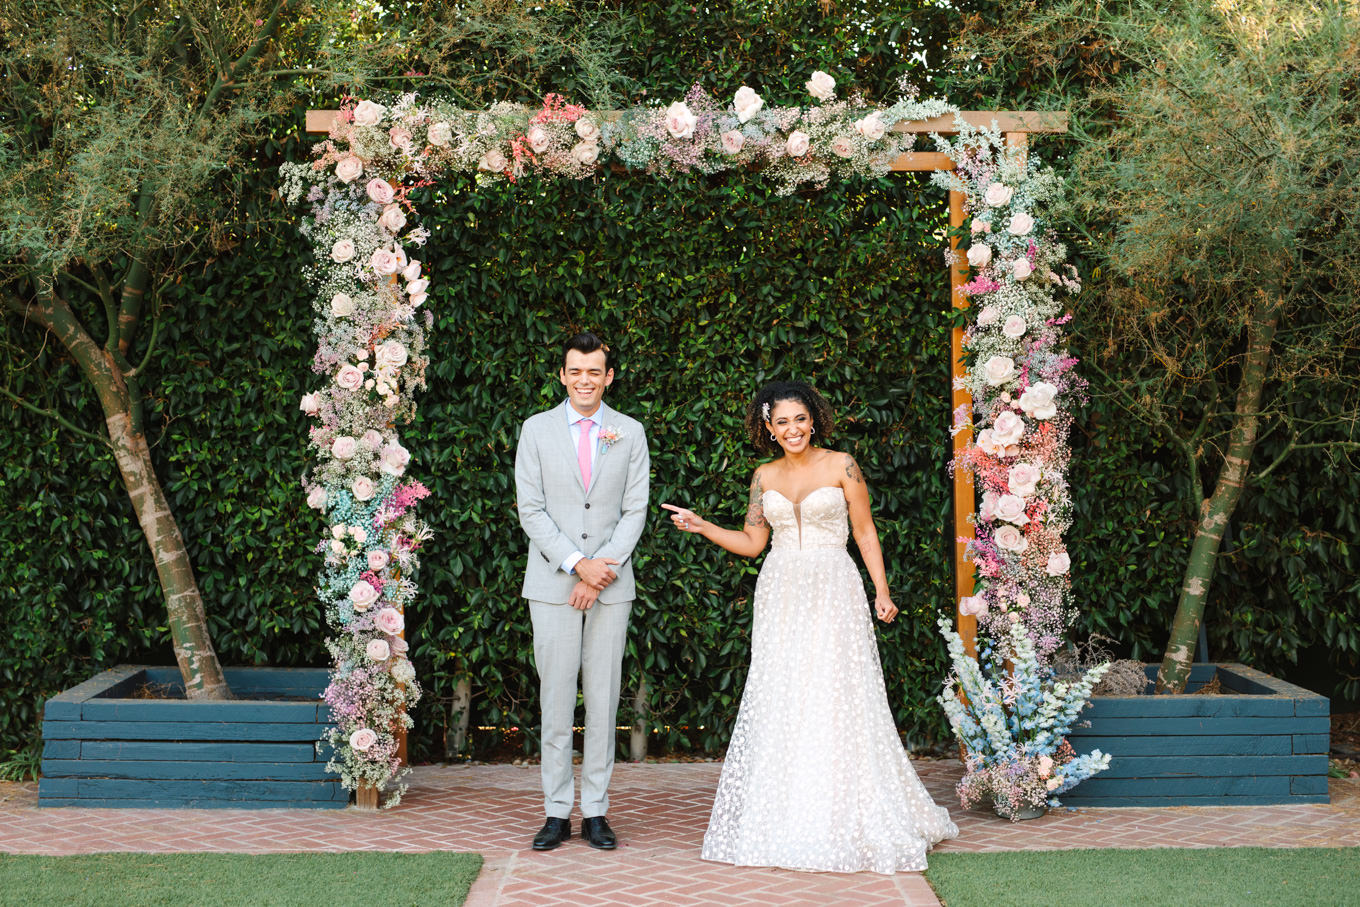 Cute first look with bride and groom | Colorful pop-up micro wedding at The Ruby Street Los Angeles featured on Green Wedding Shoes | Colorful and elevated photography for fun-loving couples in Southern California | #colorfulwedding #popupwedding #weddingphotography #microwedding Source: Mary Costa Photography | Los Angeles